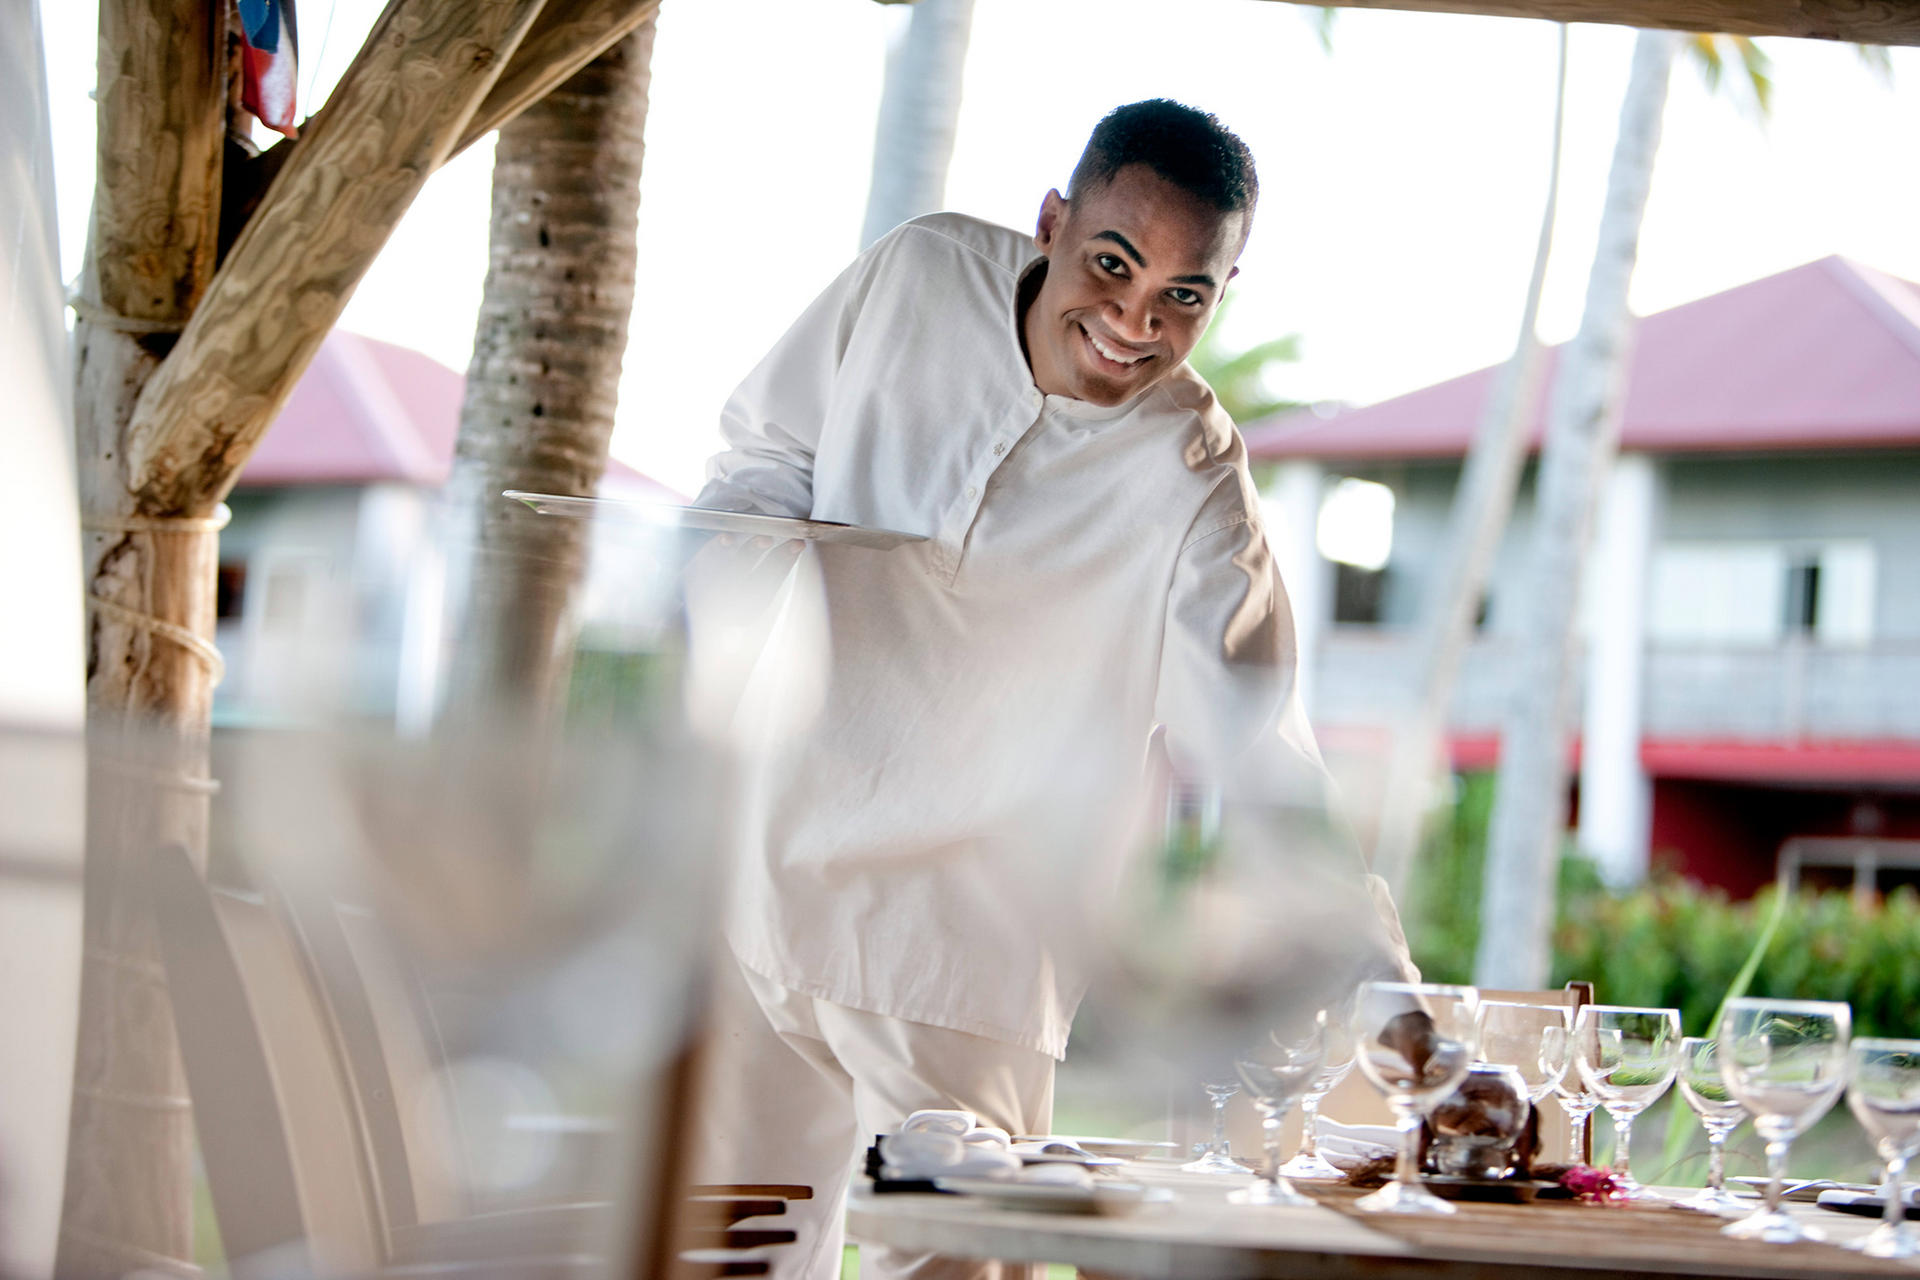 Campeche restaurant, Cap Est Lagoon Resort & Spa, serves up culinary delights in a relaxed environment.